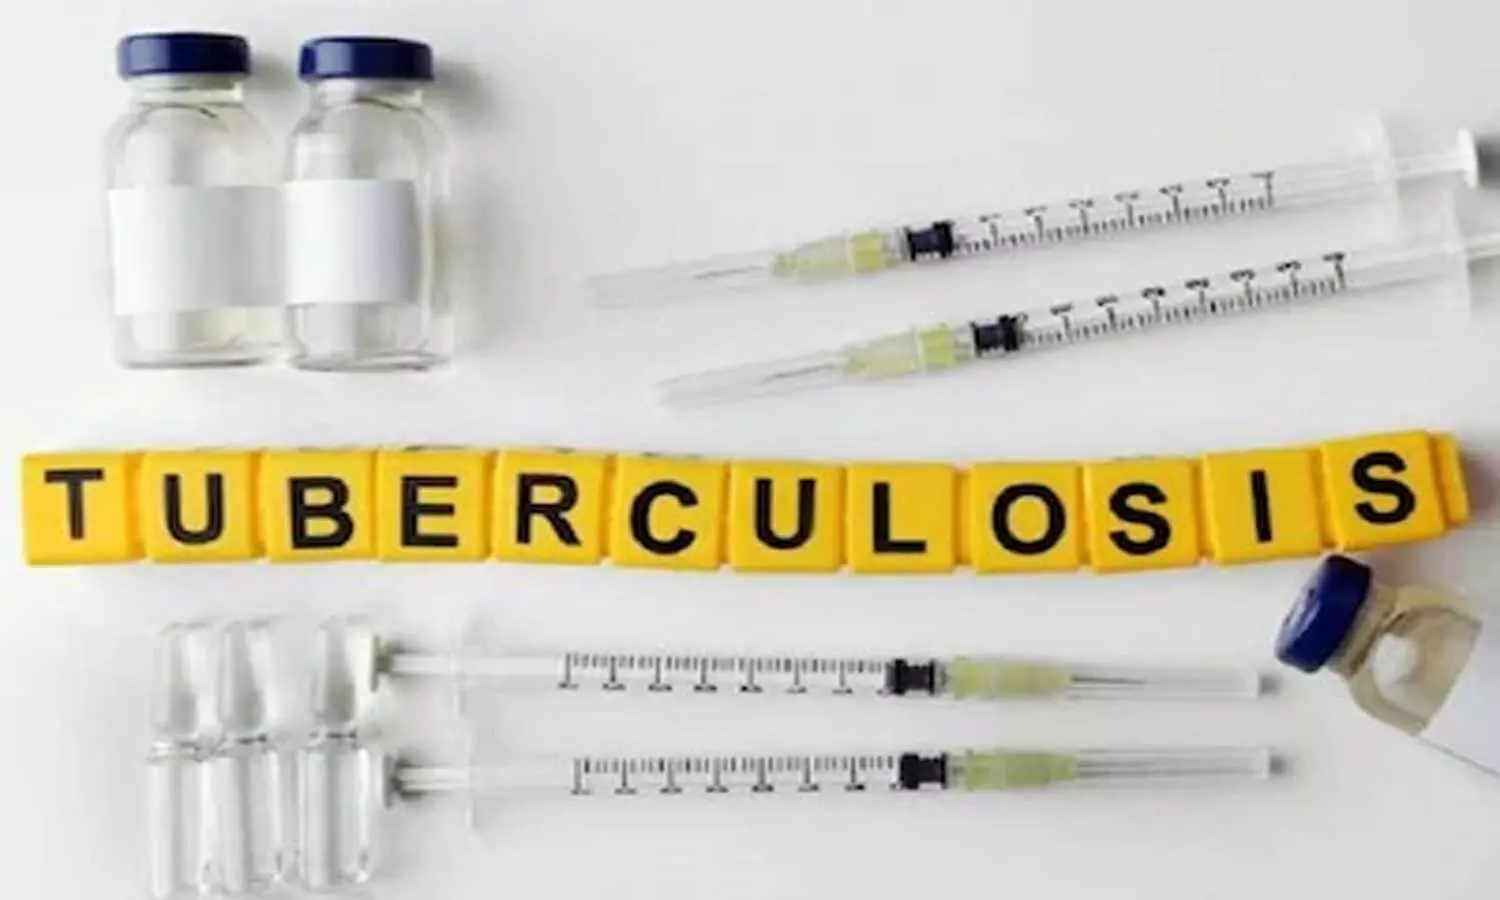 Treatment length for children with tuberculosis now reduced: Research